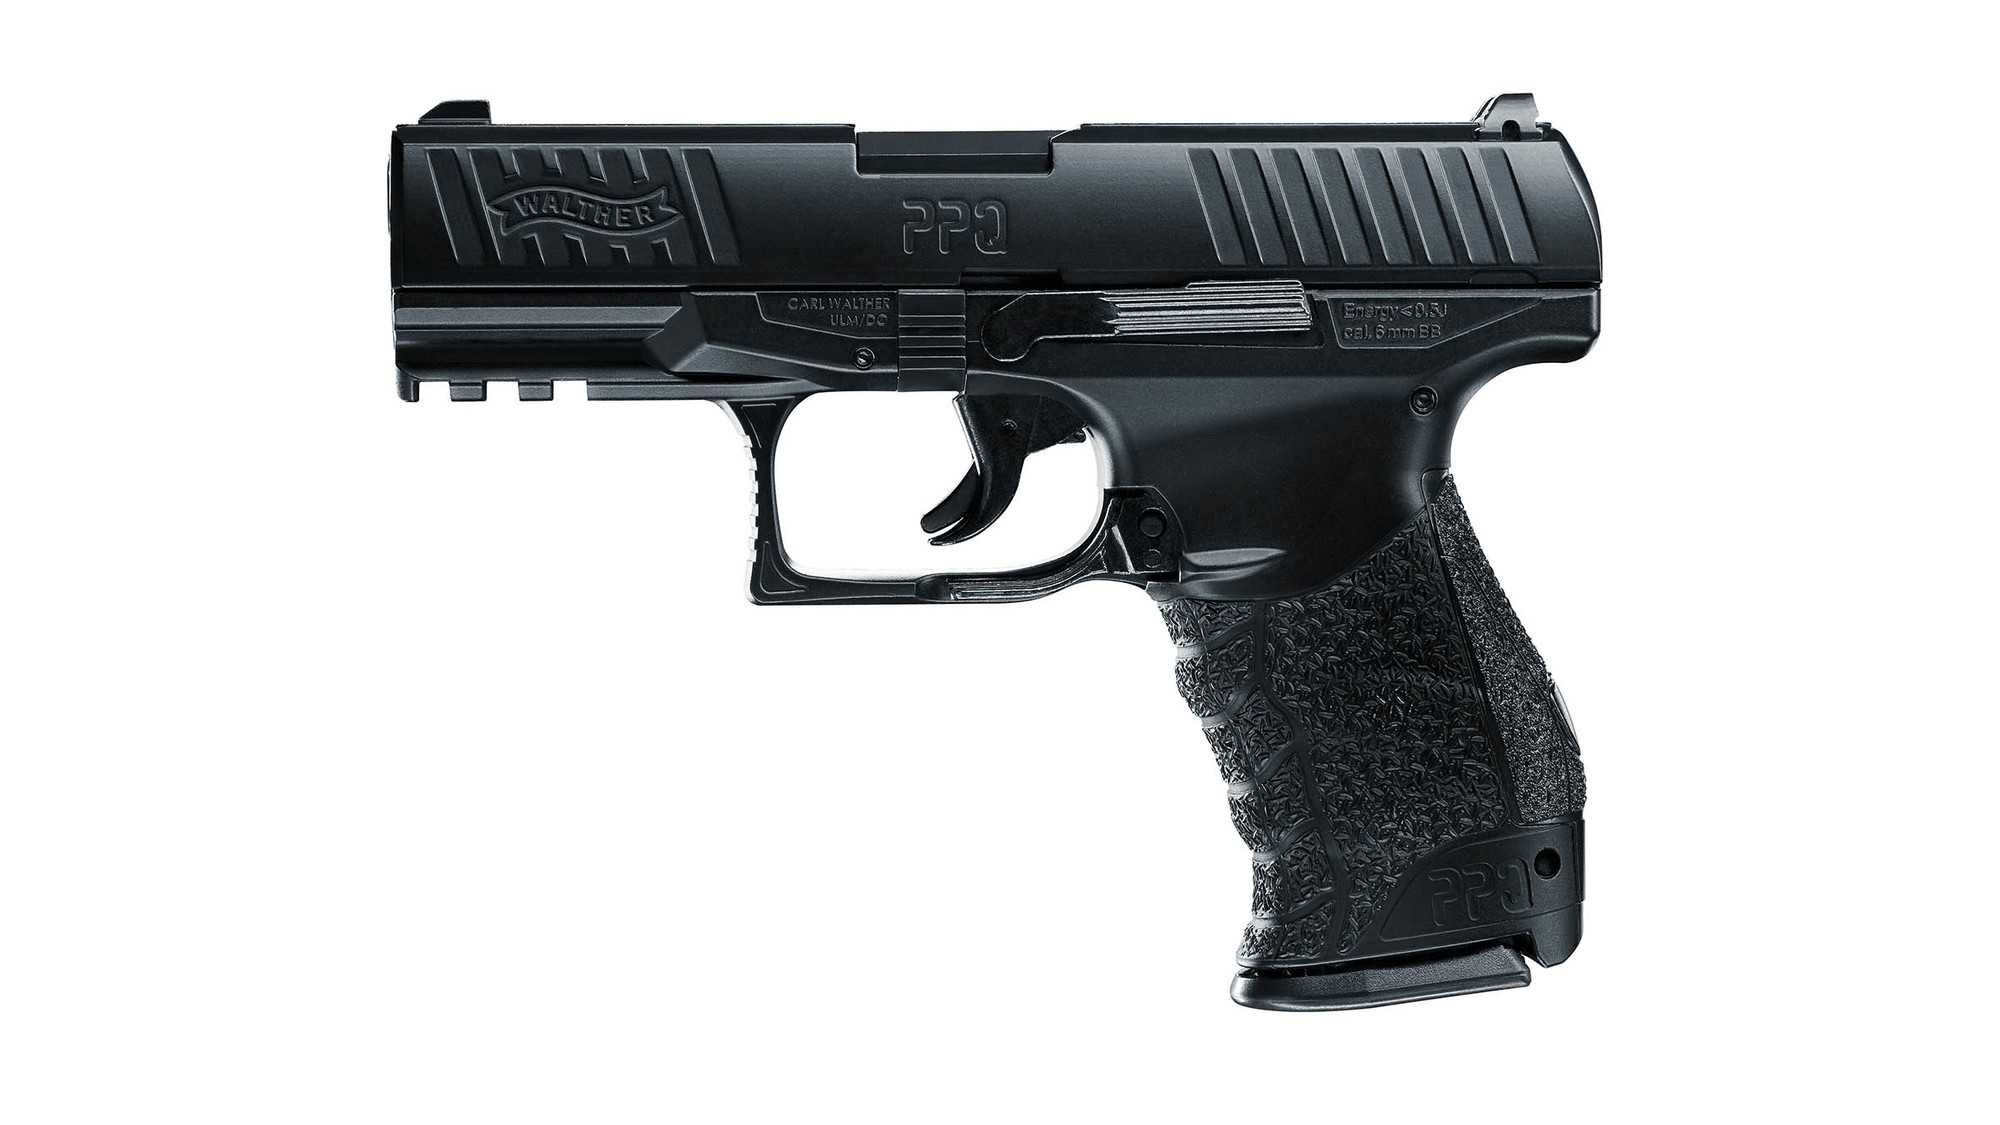 Pistol airsoft Walther PPQ HME full metal spring